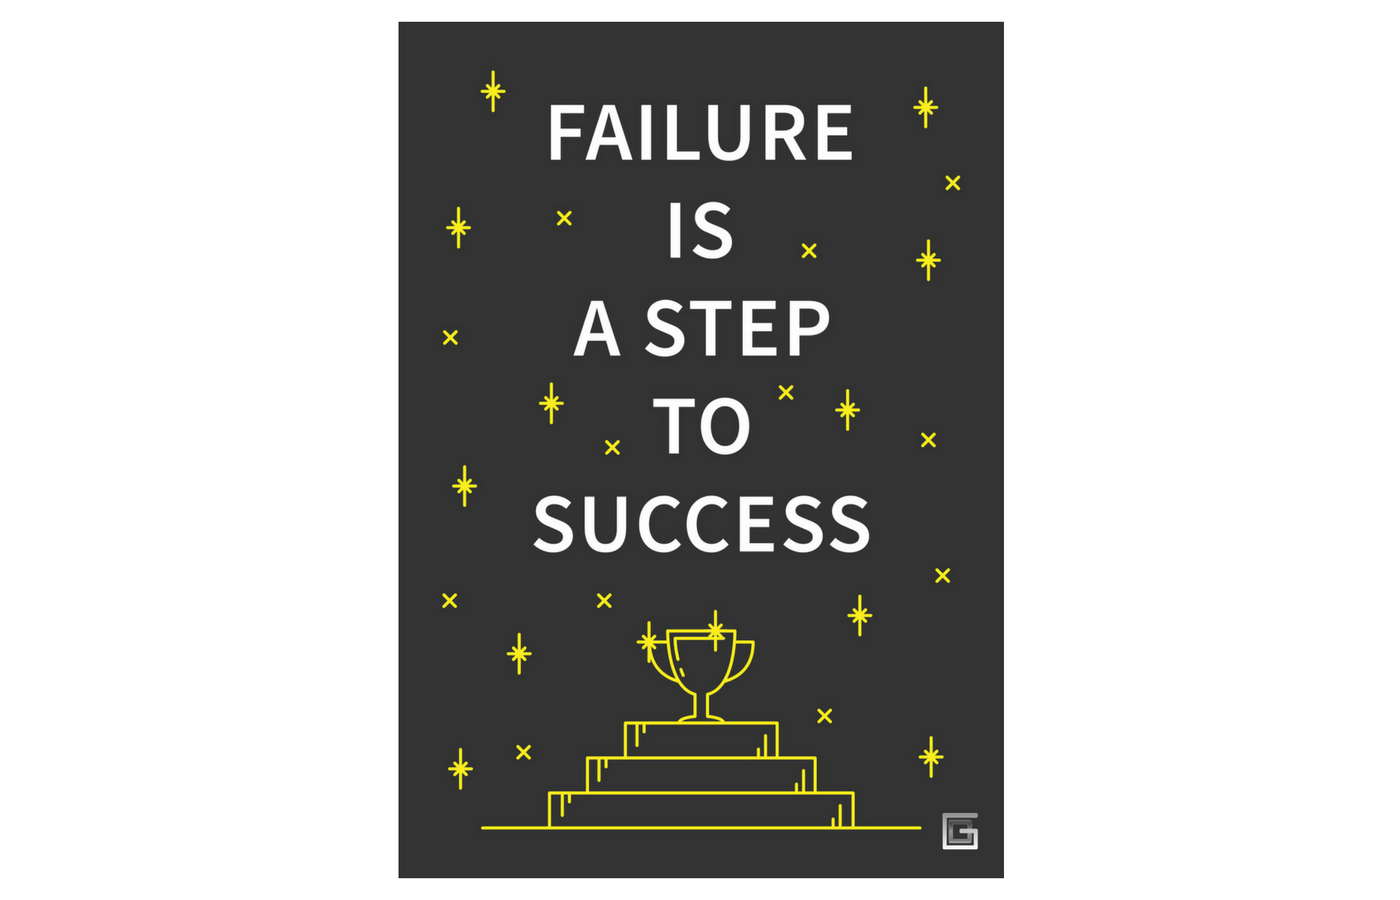 Failure is a step to success